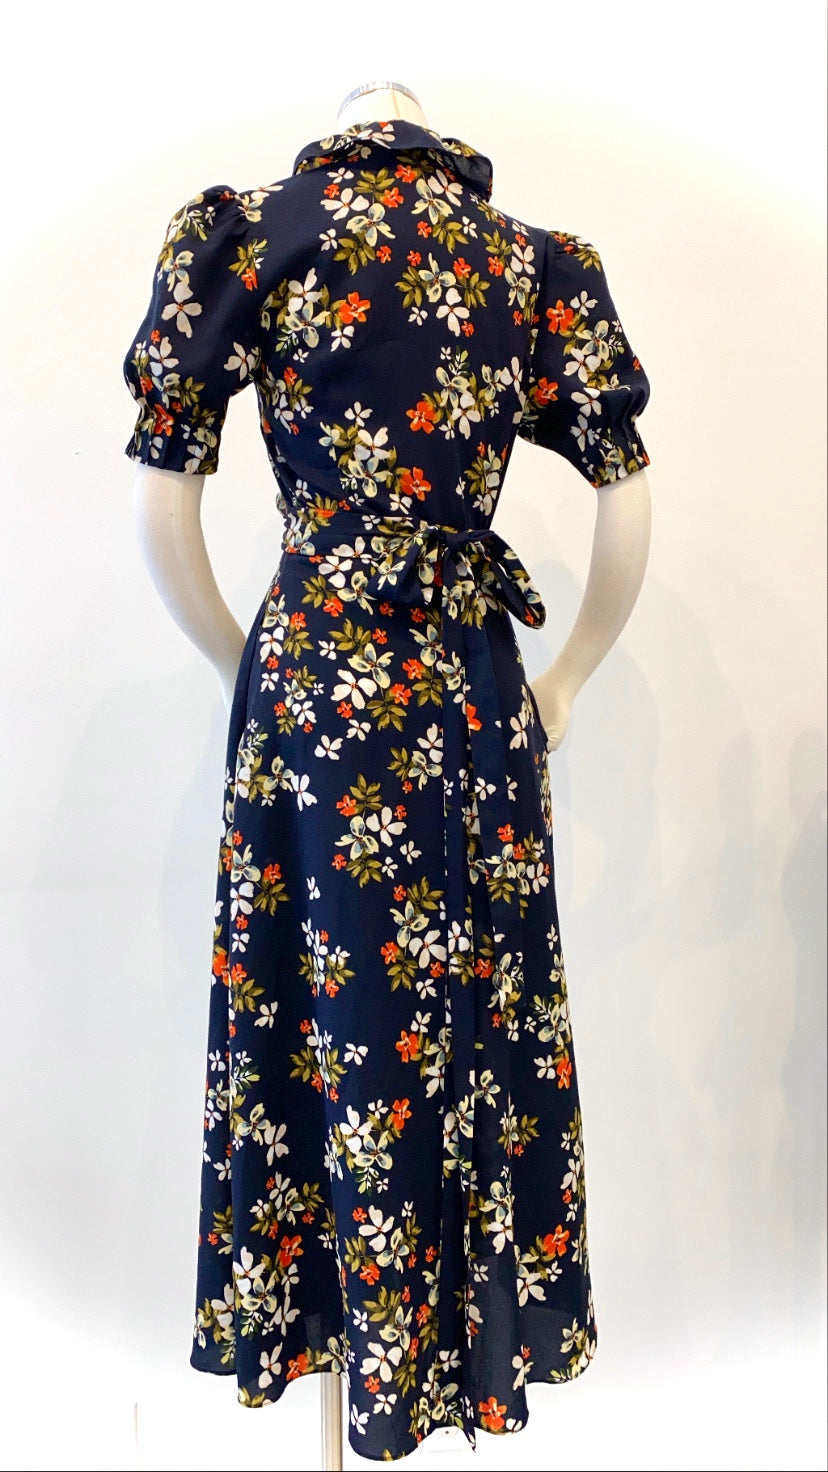 Jill Stuart - Navy Floral Printed Dress with Ruffled Neck and Belt